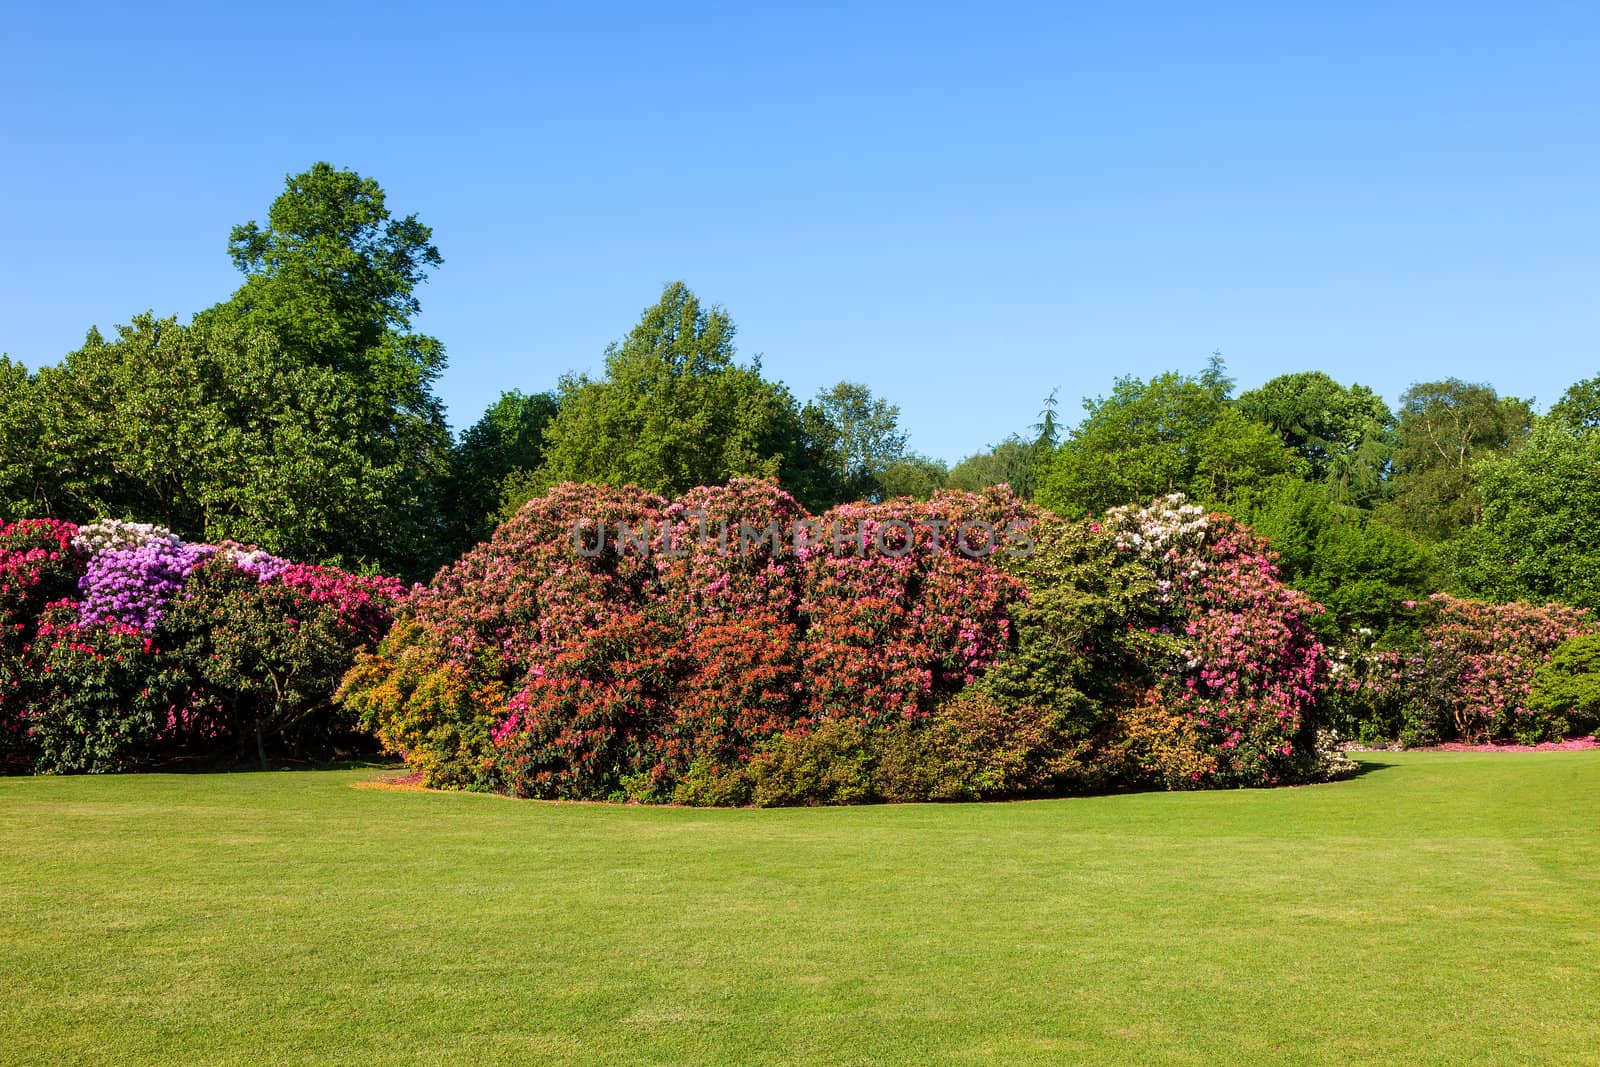 Colorful Rhododendron Bushes in Lush Sunny Garden Blue Sky by scheriton